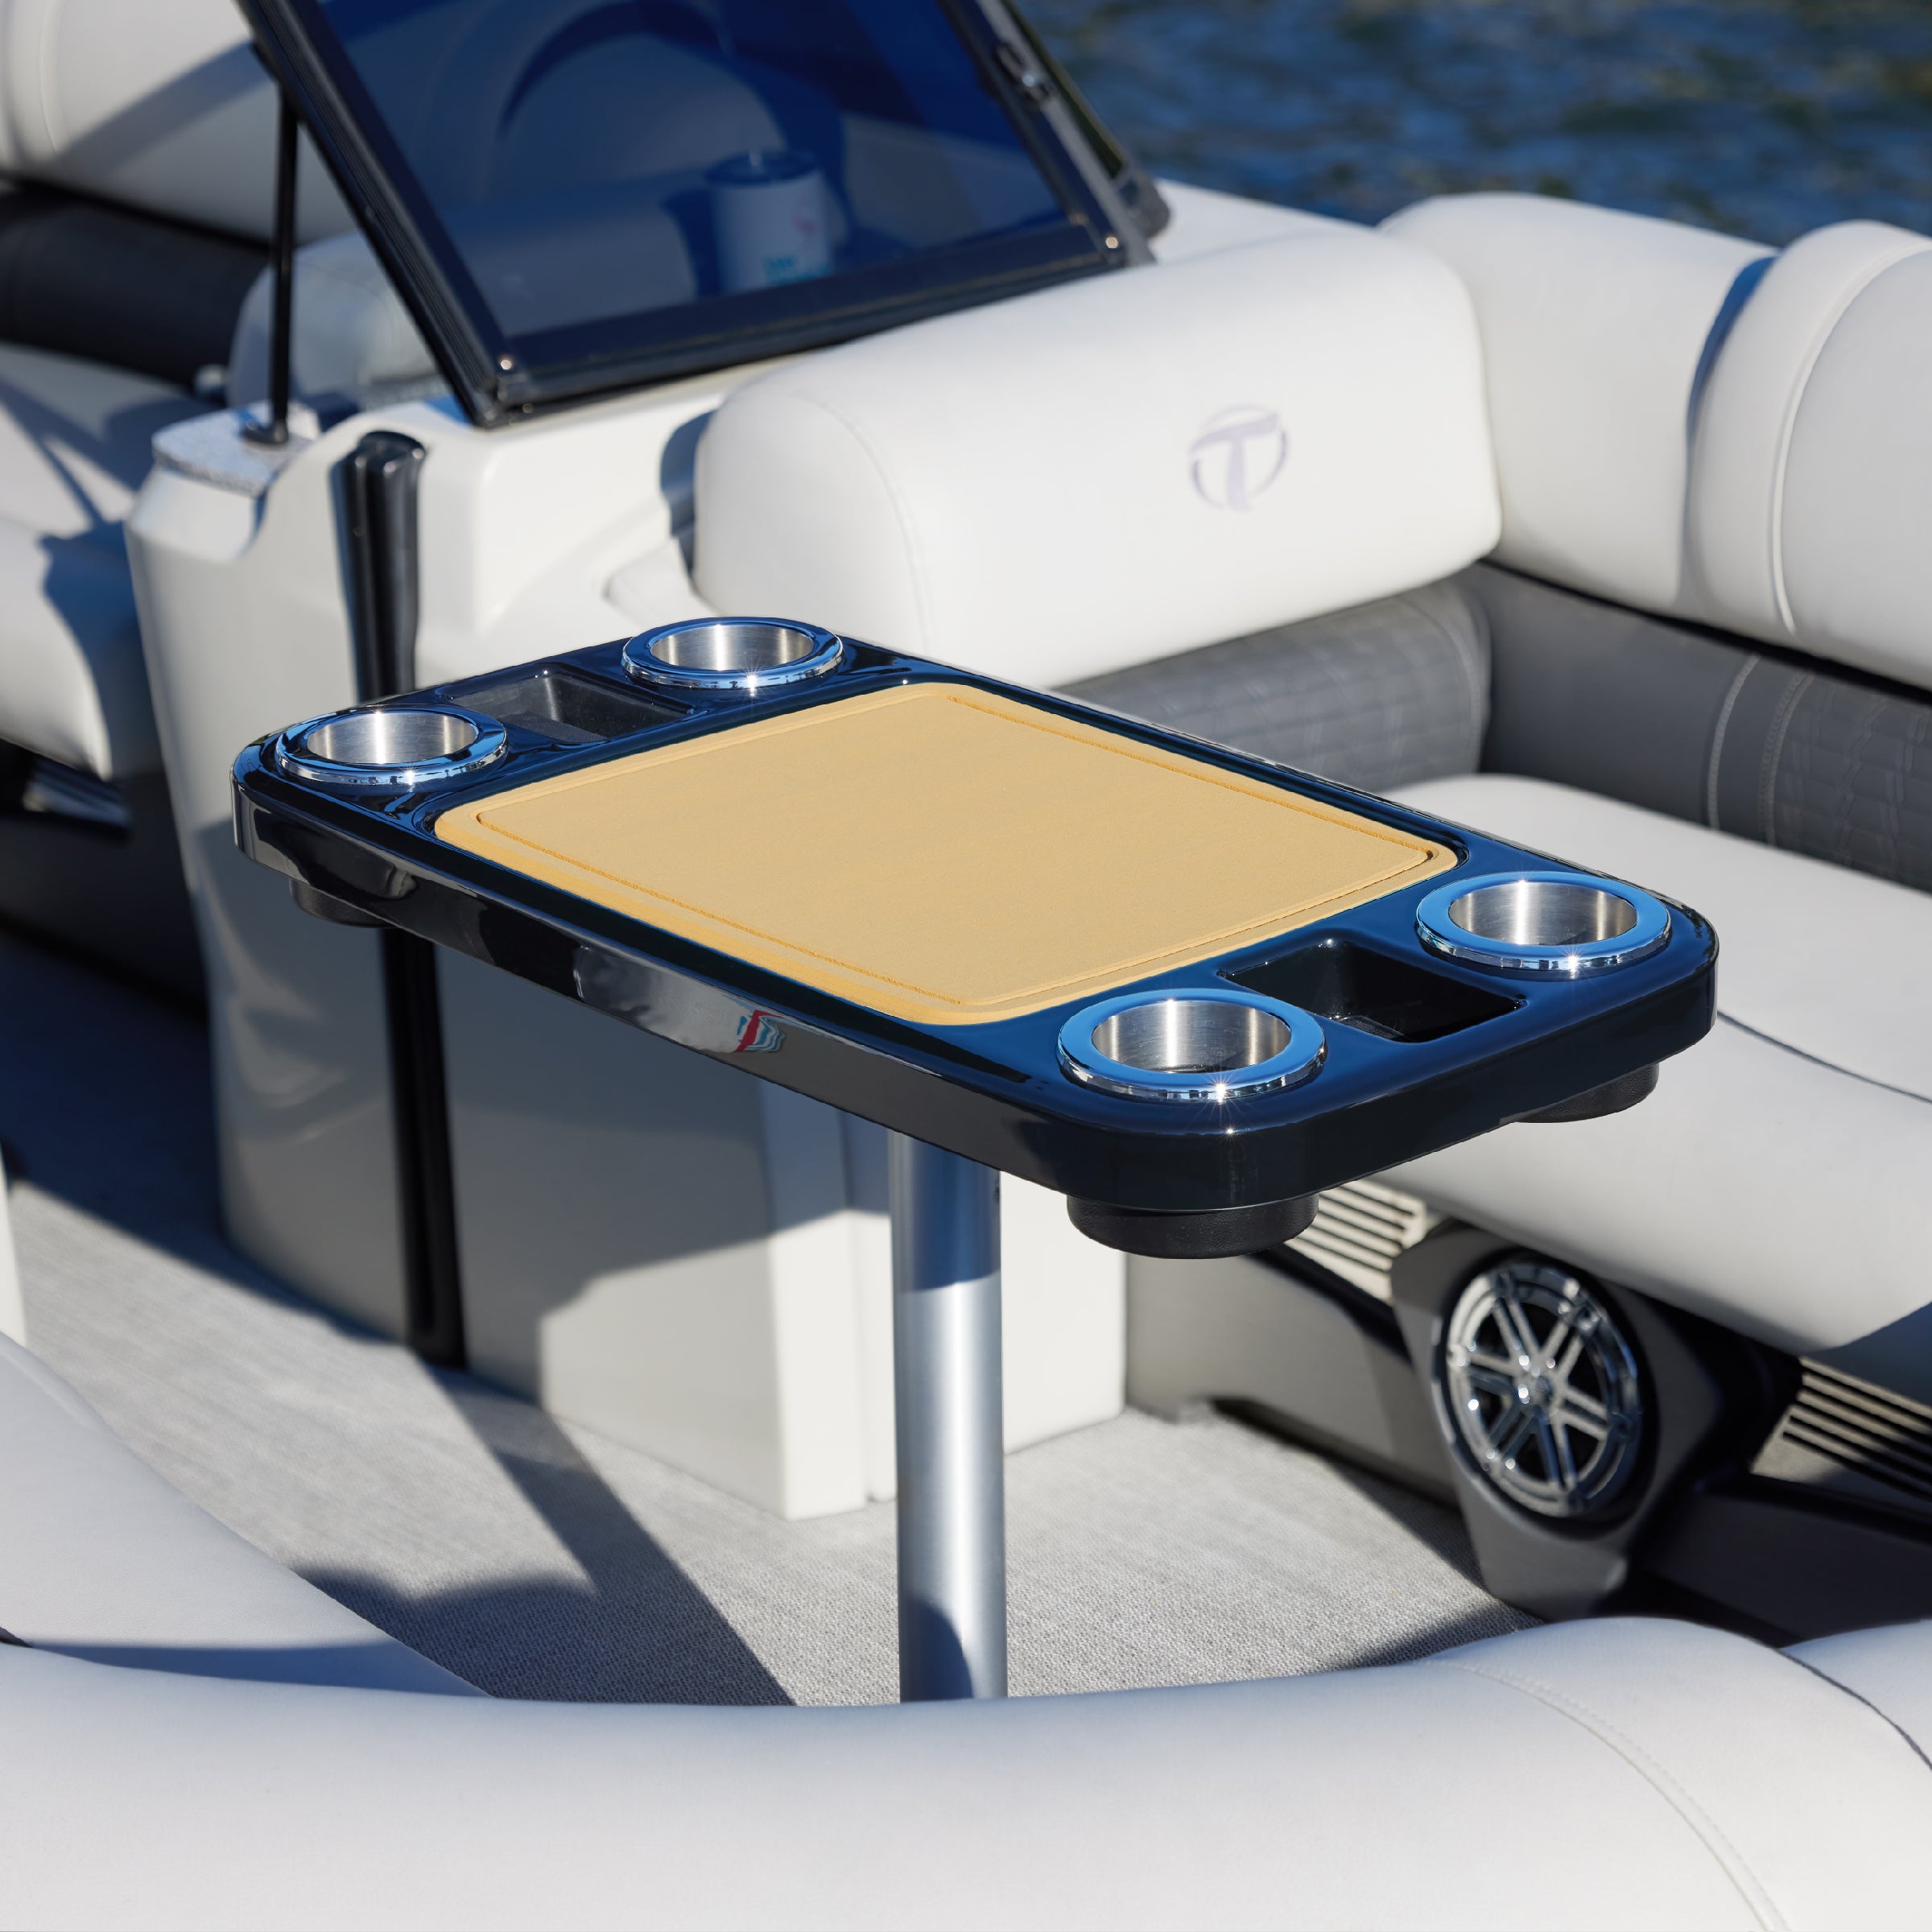 Party Boat Table Center Foam Saddle Mats | ITC Shop Now